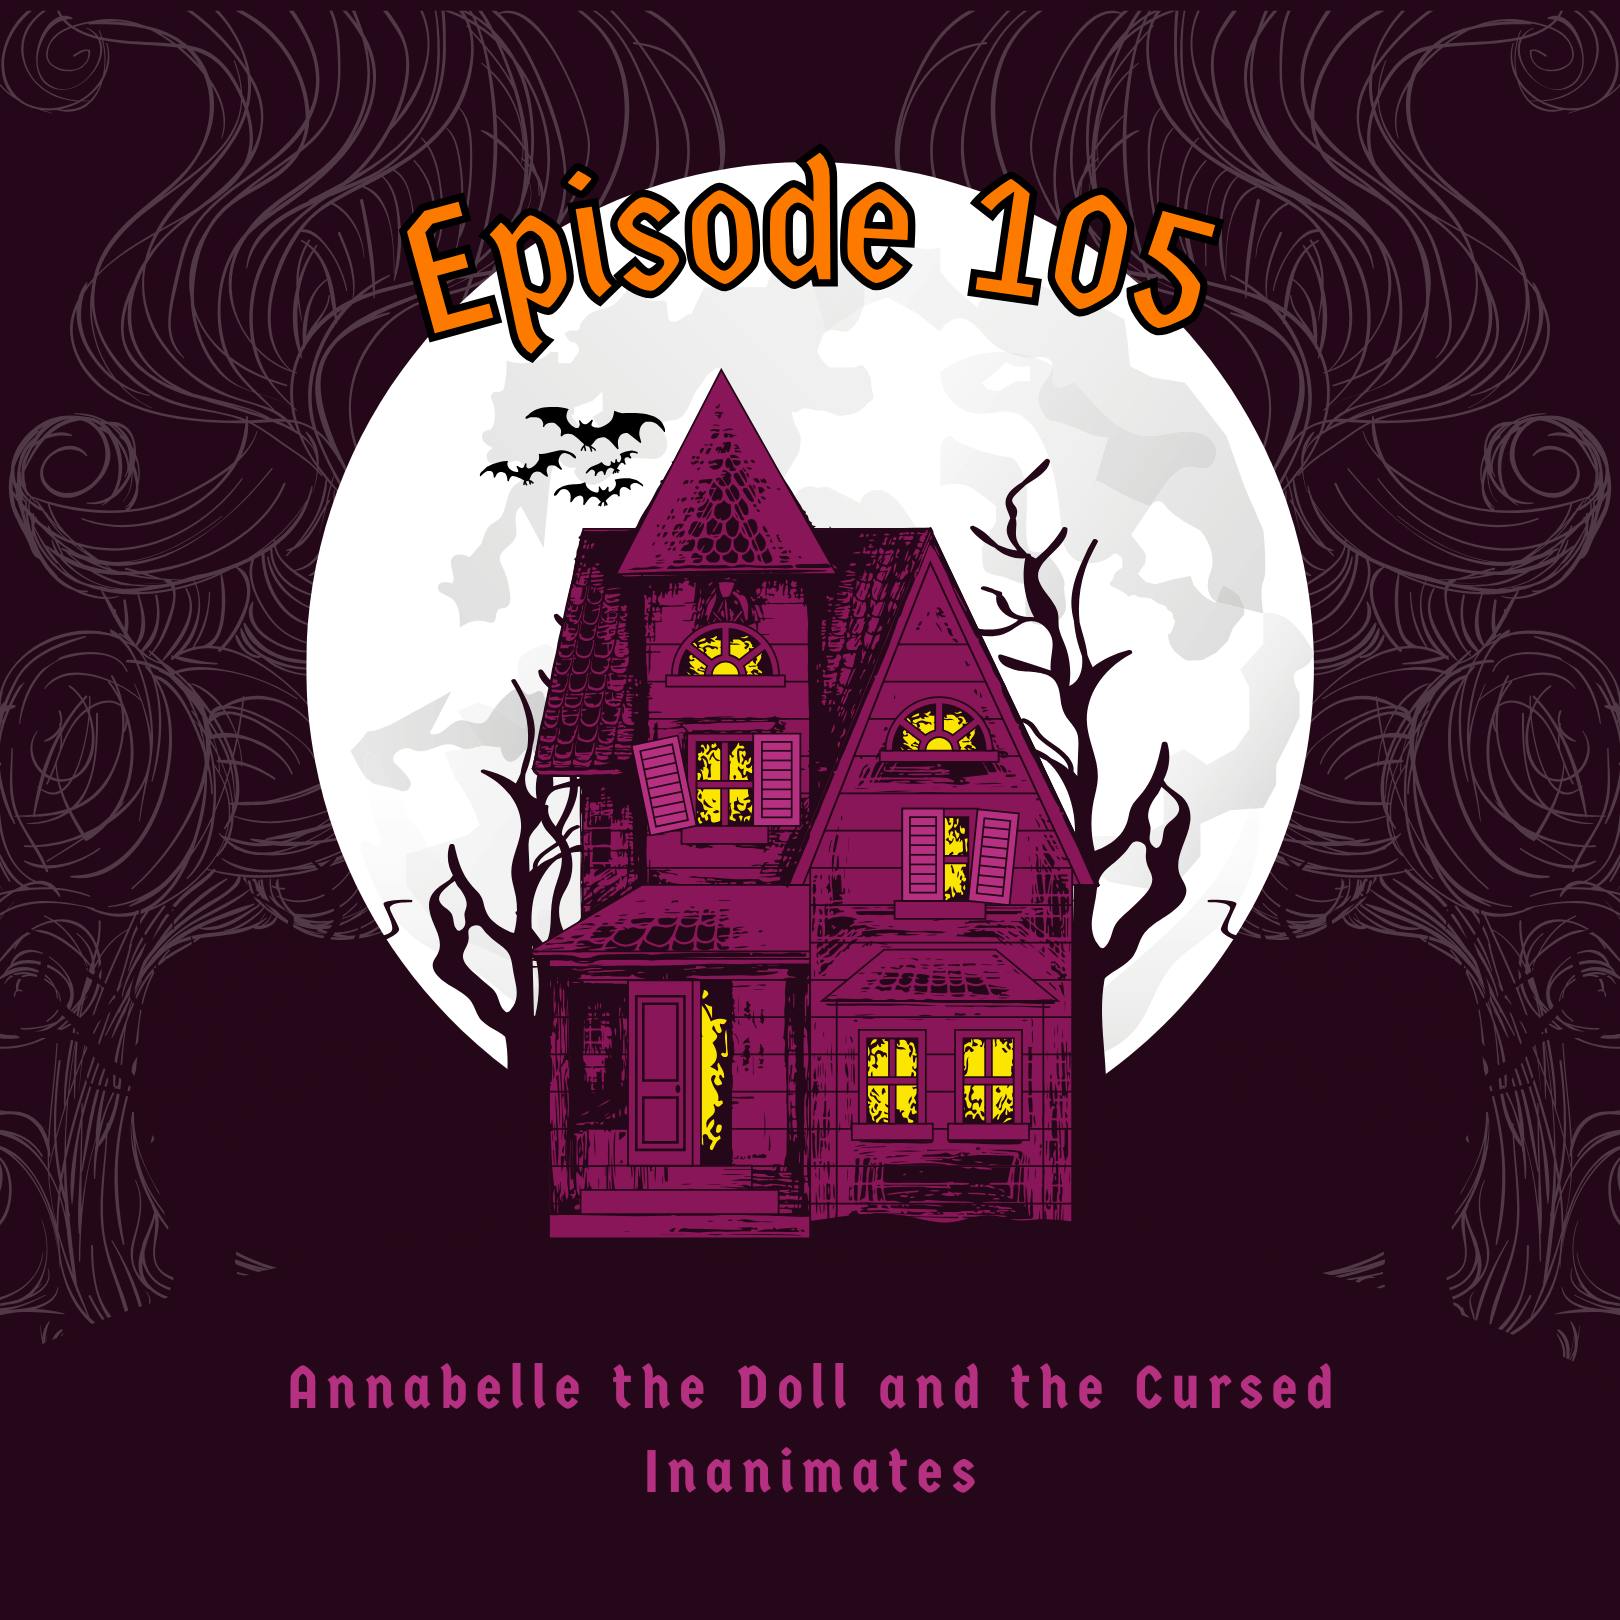 Episode 105: Annabelle the Doll and the Cursed Inanimates